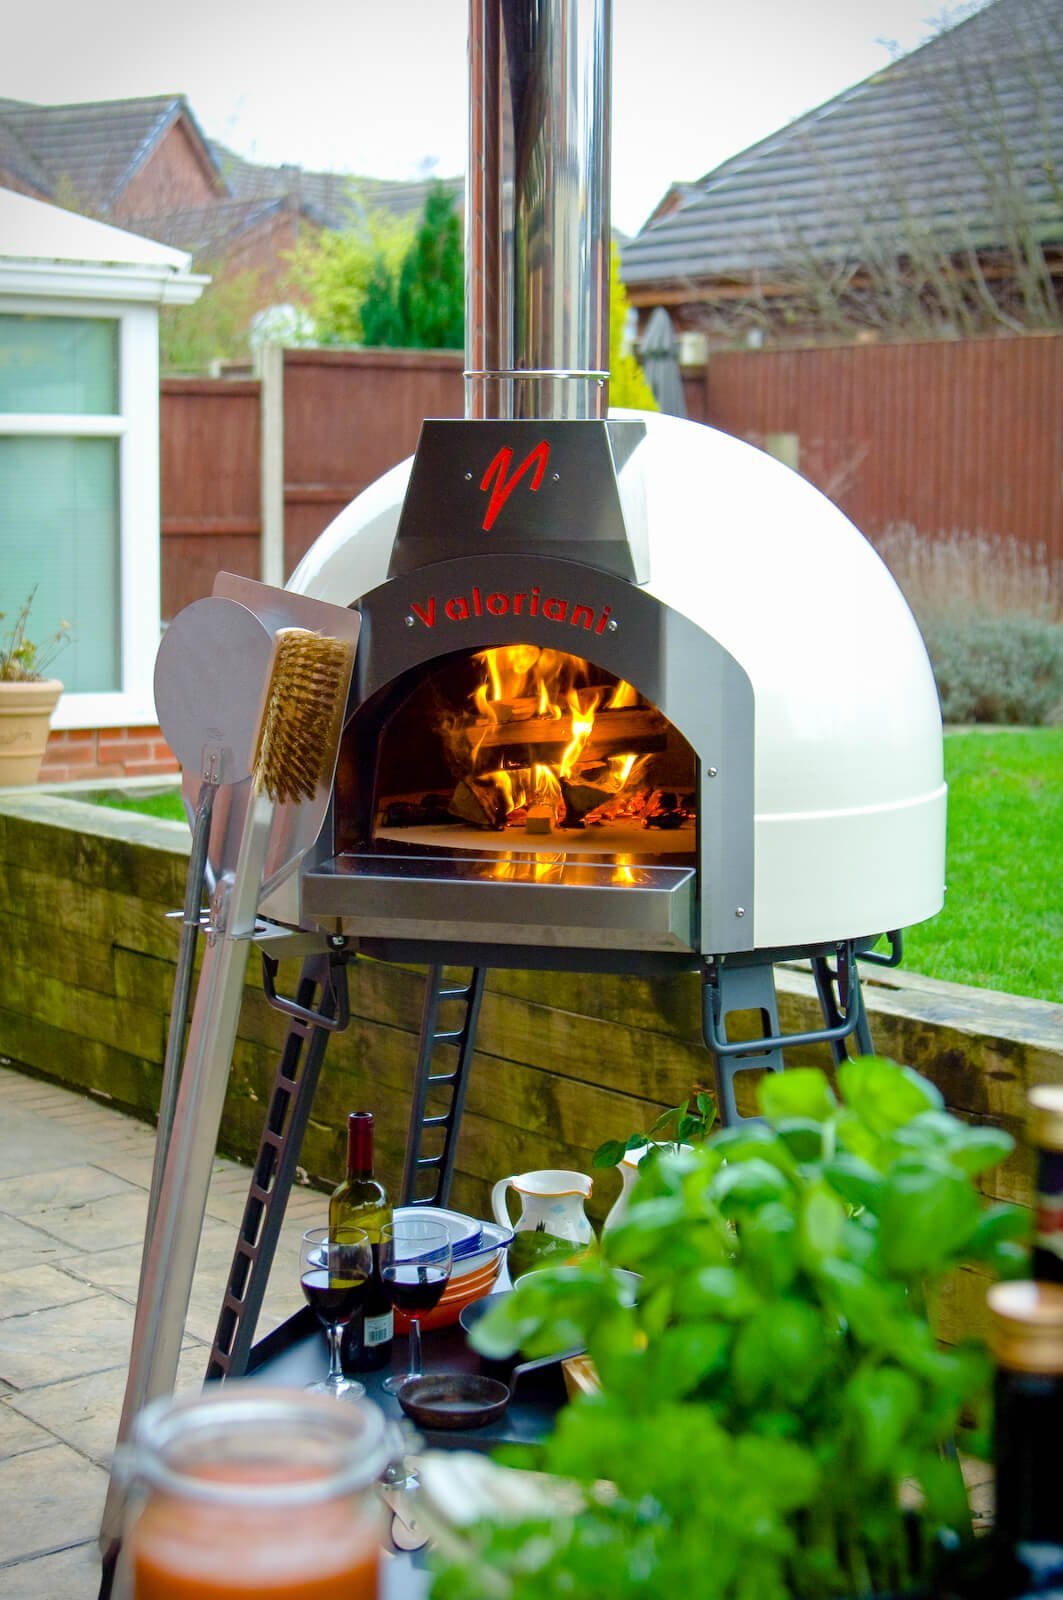 Valoriani Baby: pizza oven with gas firing and 60cm diameter, incl. complete base, black.